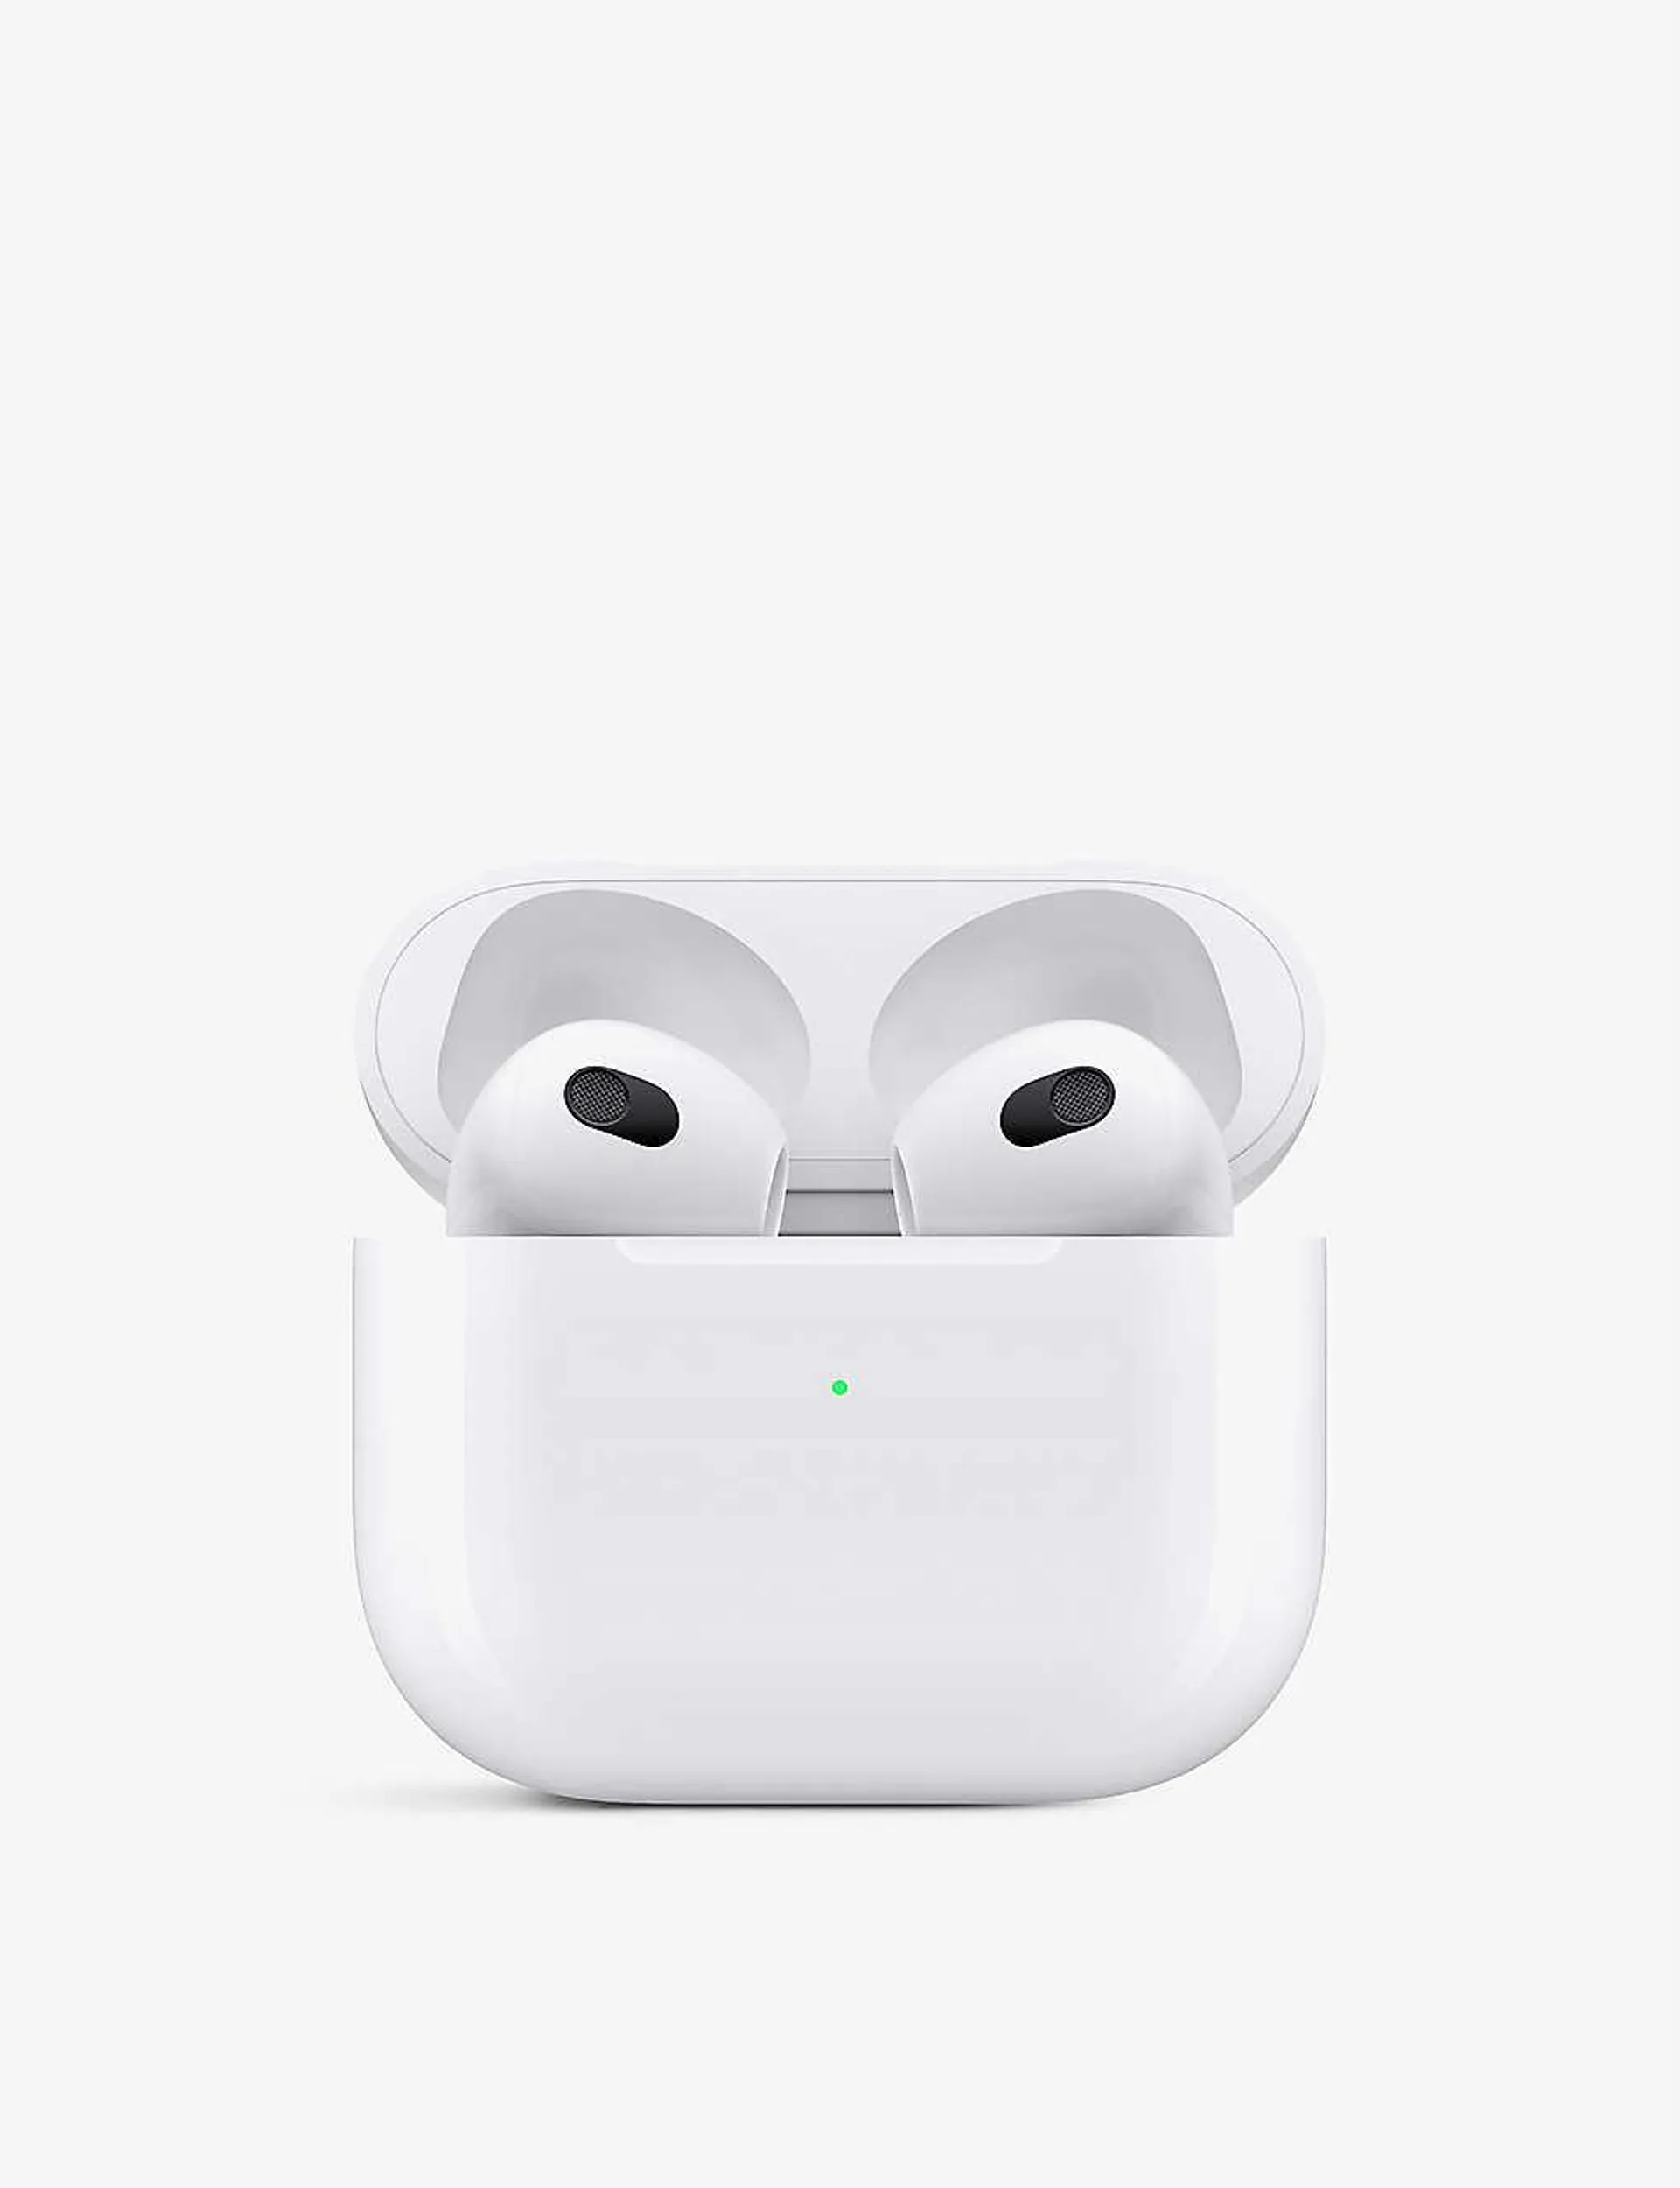 AirPods 3rd Generation earphones with MagSafe charging case